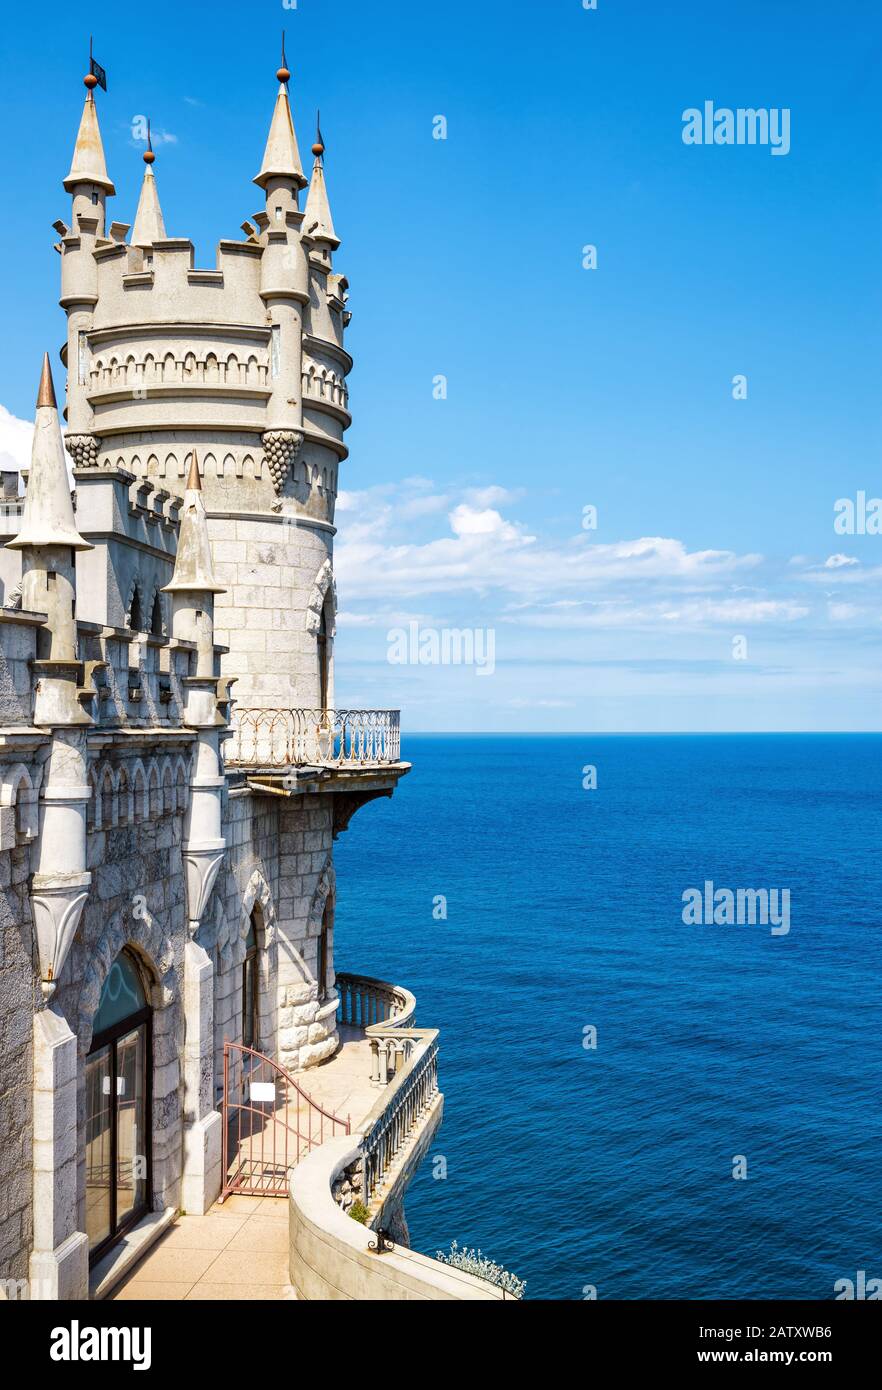 The famous castle Swallow's Nest on the rock in the Black Sea in Crimea, Russia. This castle is a symbol of Crimea. Stock Photo